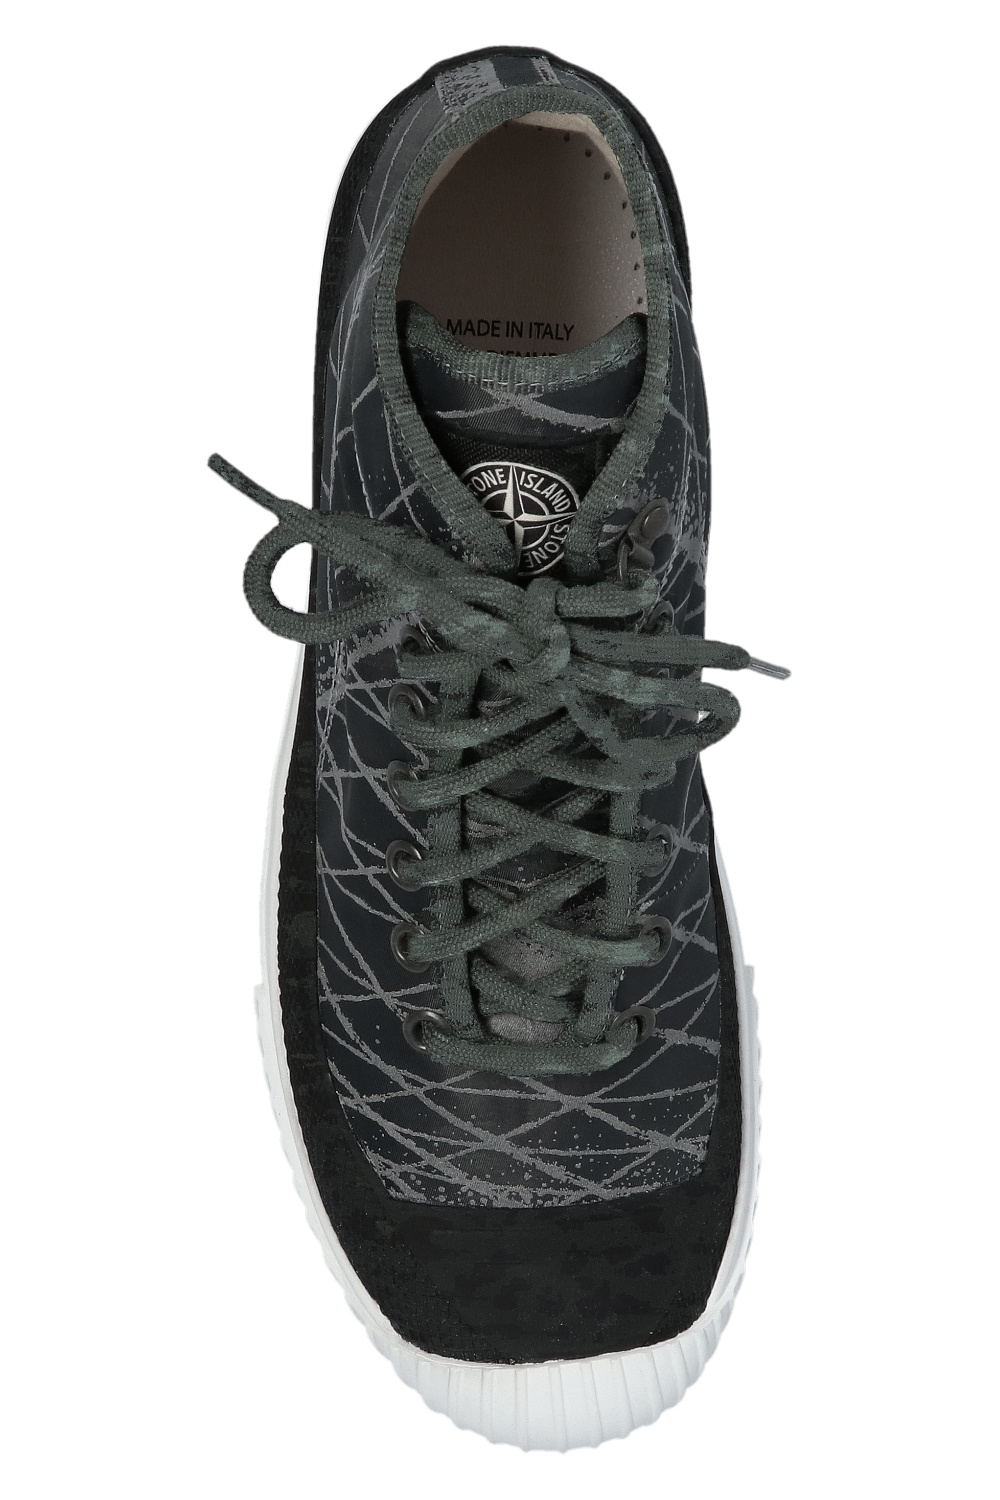 Stone Island Sneakers with logo